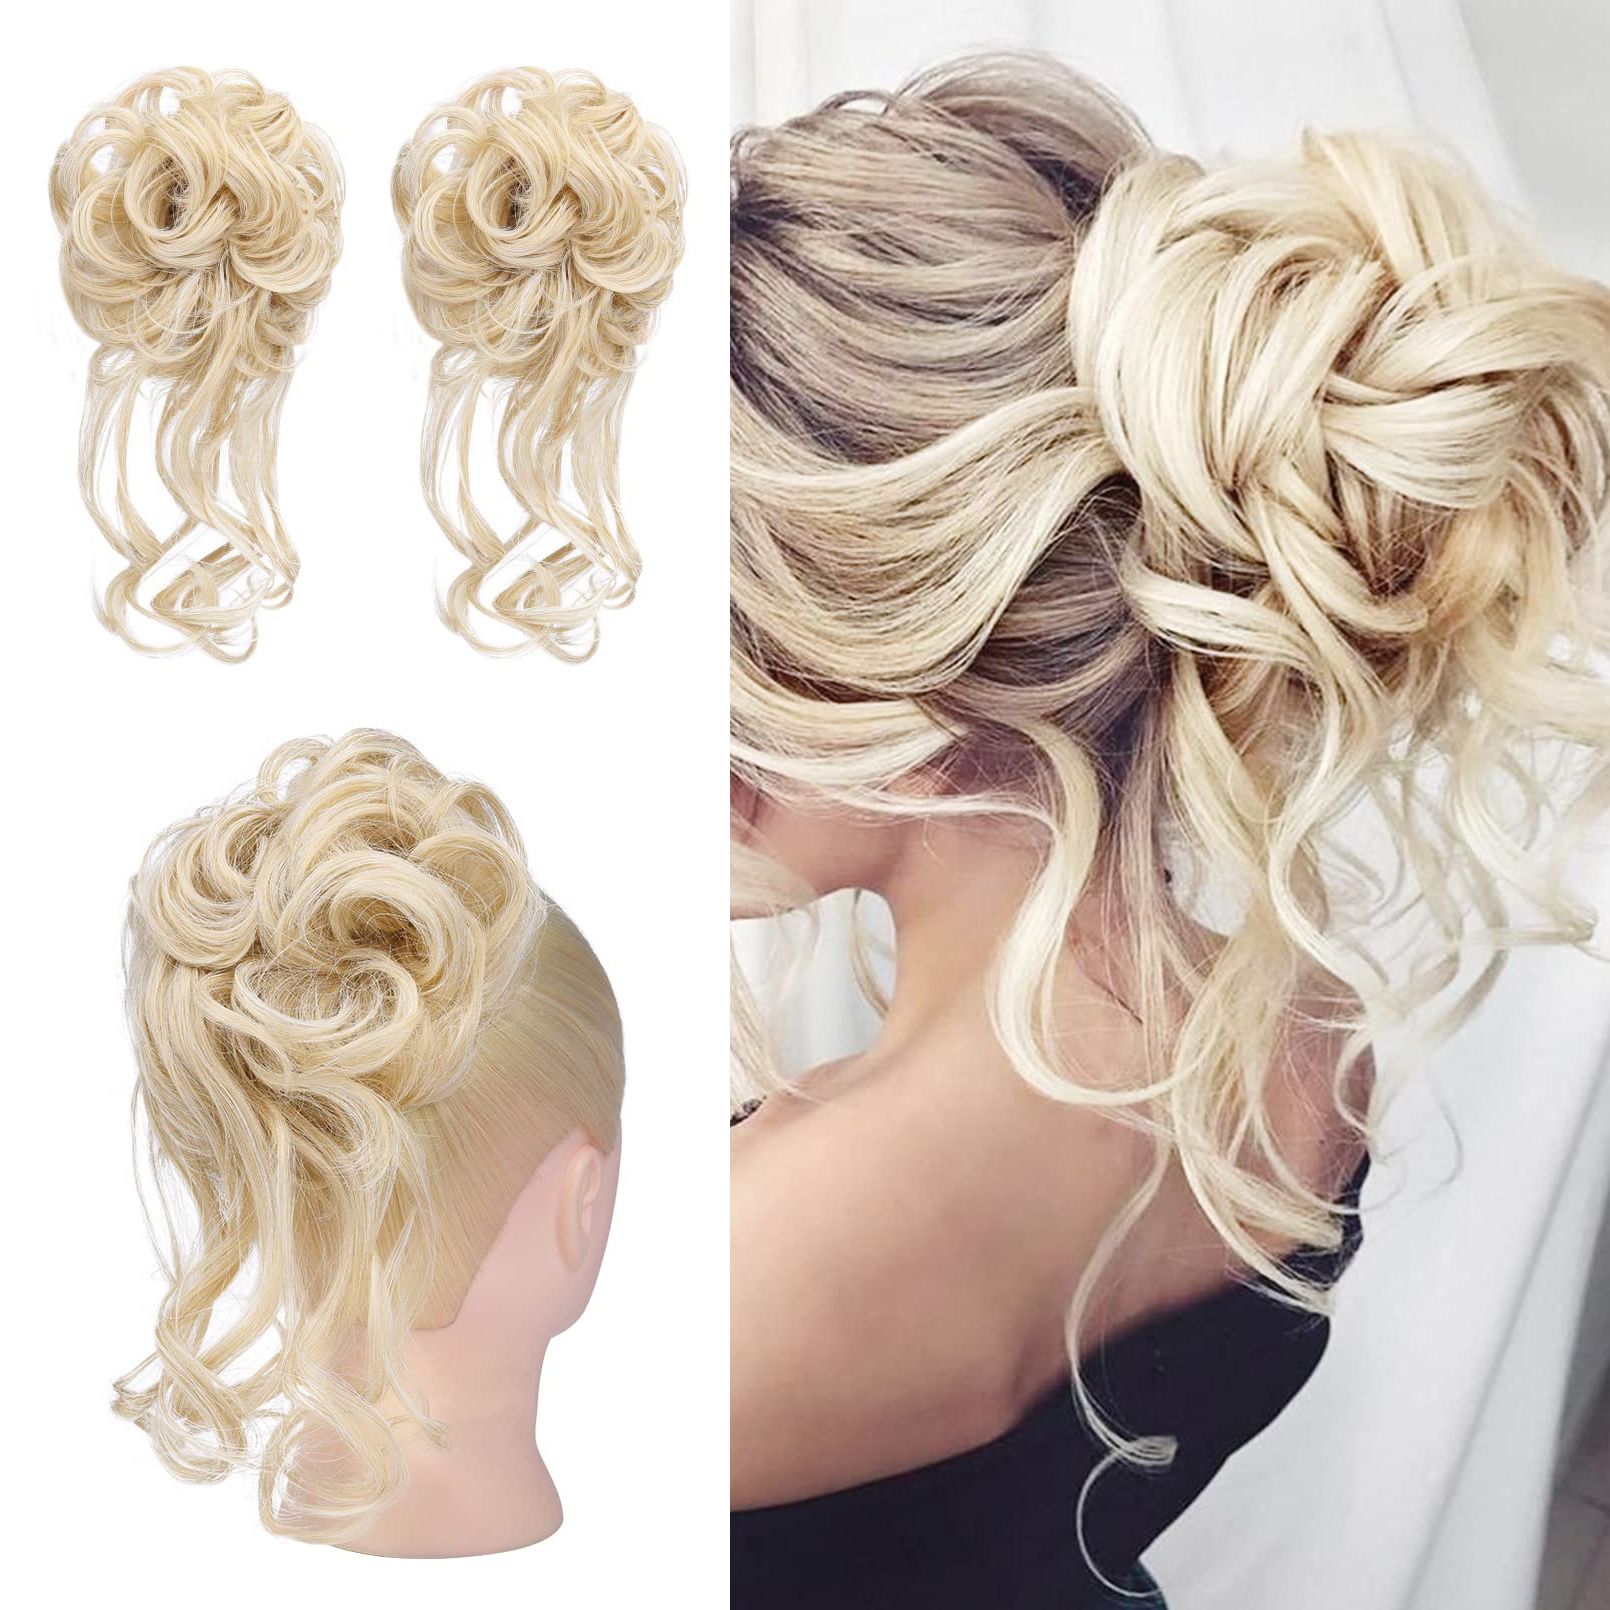 Hoojih Messy Bun Hair Piece, 2pcs Tousled Updo With Tendrils Hair Bun  Extensions Wavy Curly Hair Wrap Ponytail Hairpieces Thick Hair Scrunchies  For Women Girls – Cool Light Blonde 2 Pack Cool Within 2018 Bun Updo With Accessories For Thick Hair (Gallery 2 of 15)